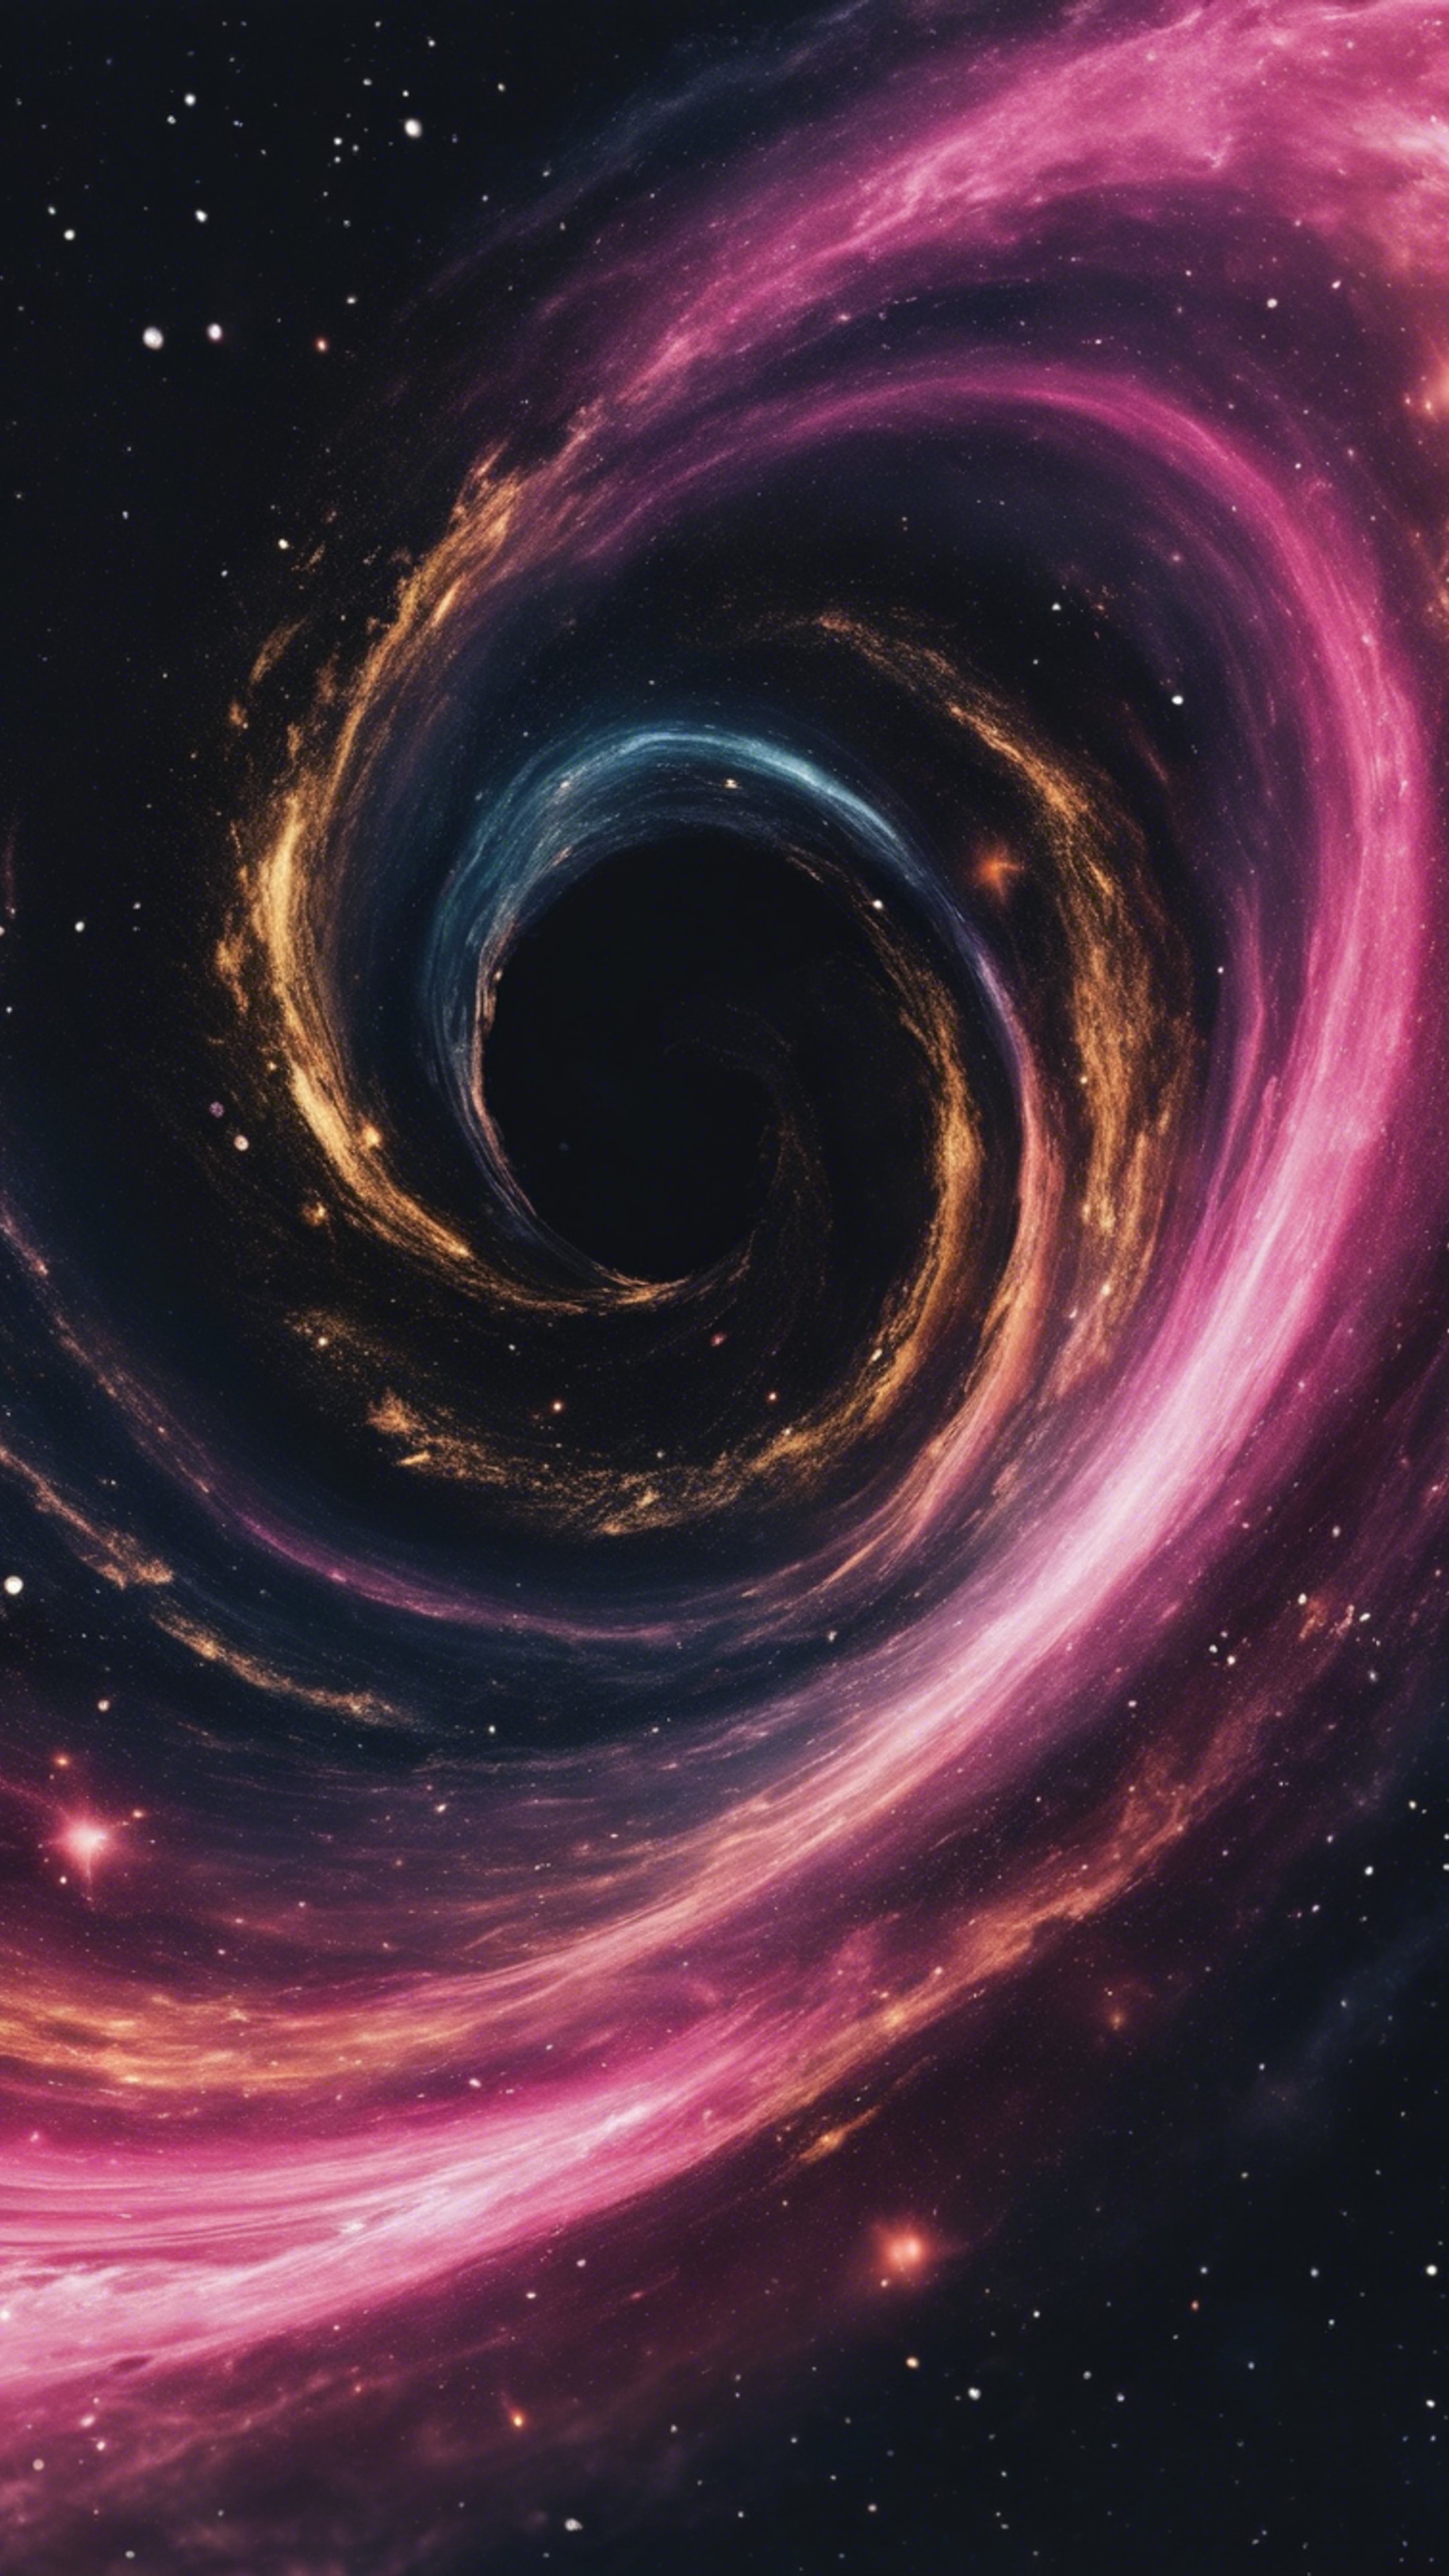 A swirling Galaxy with hues of pink and gold amongst the dark void of space. Divar kağızı[38386911806f452c9333]